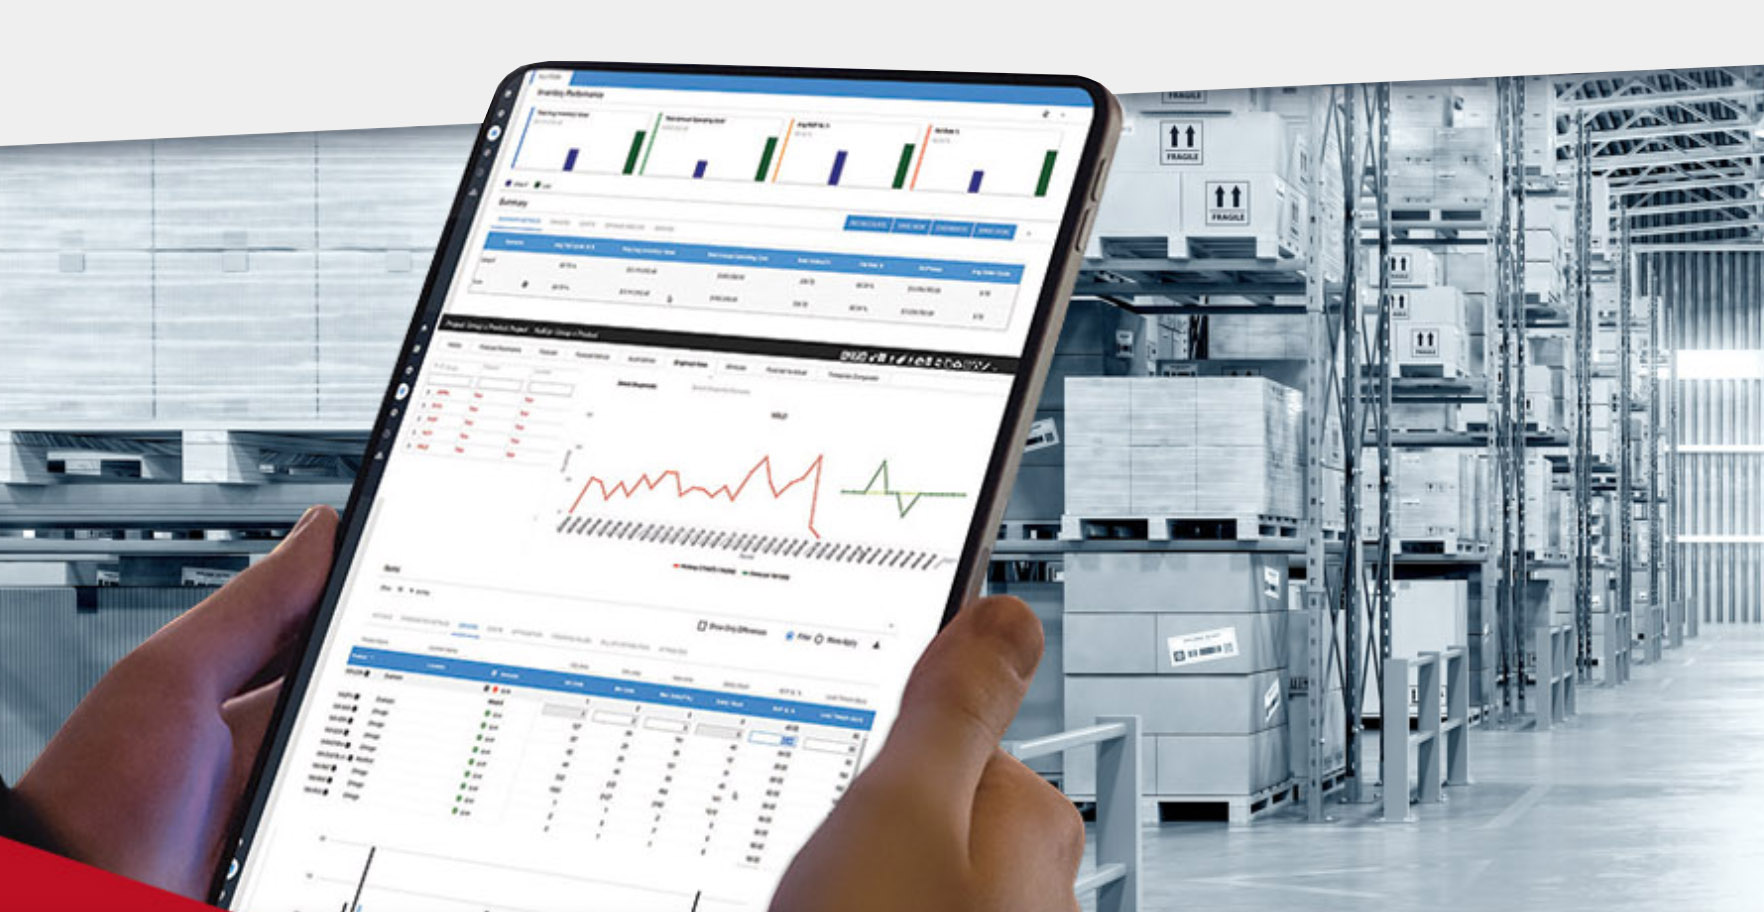 Ipad with business data of improved Demand & Inventory Planning 2